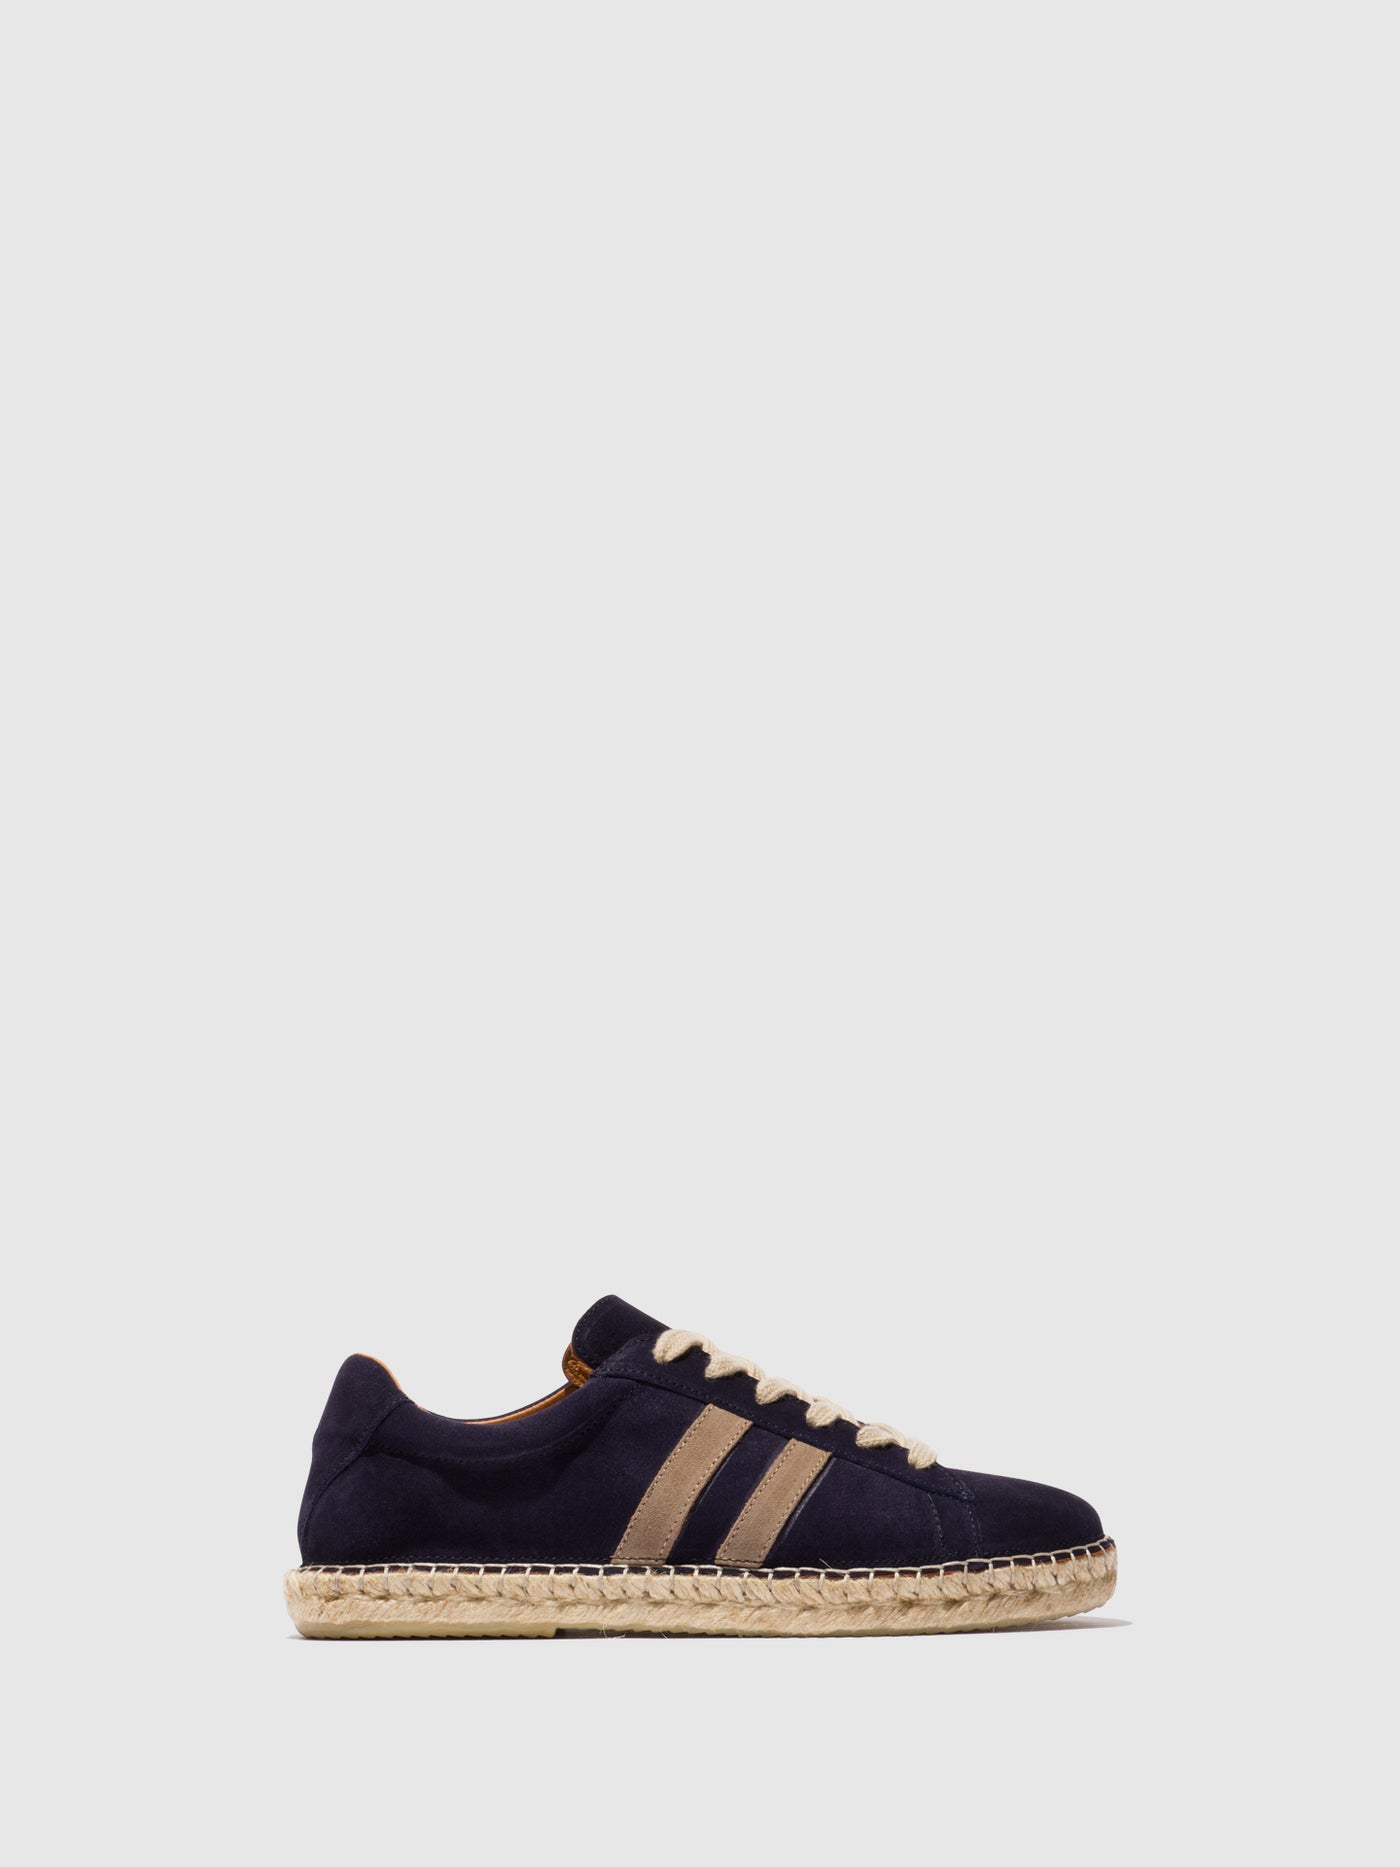 Lace-up Espadrilles SCAM529FLY NAVY/SAND